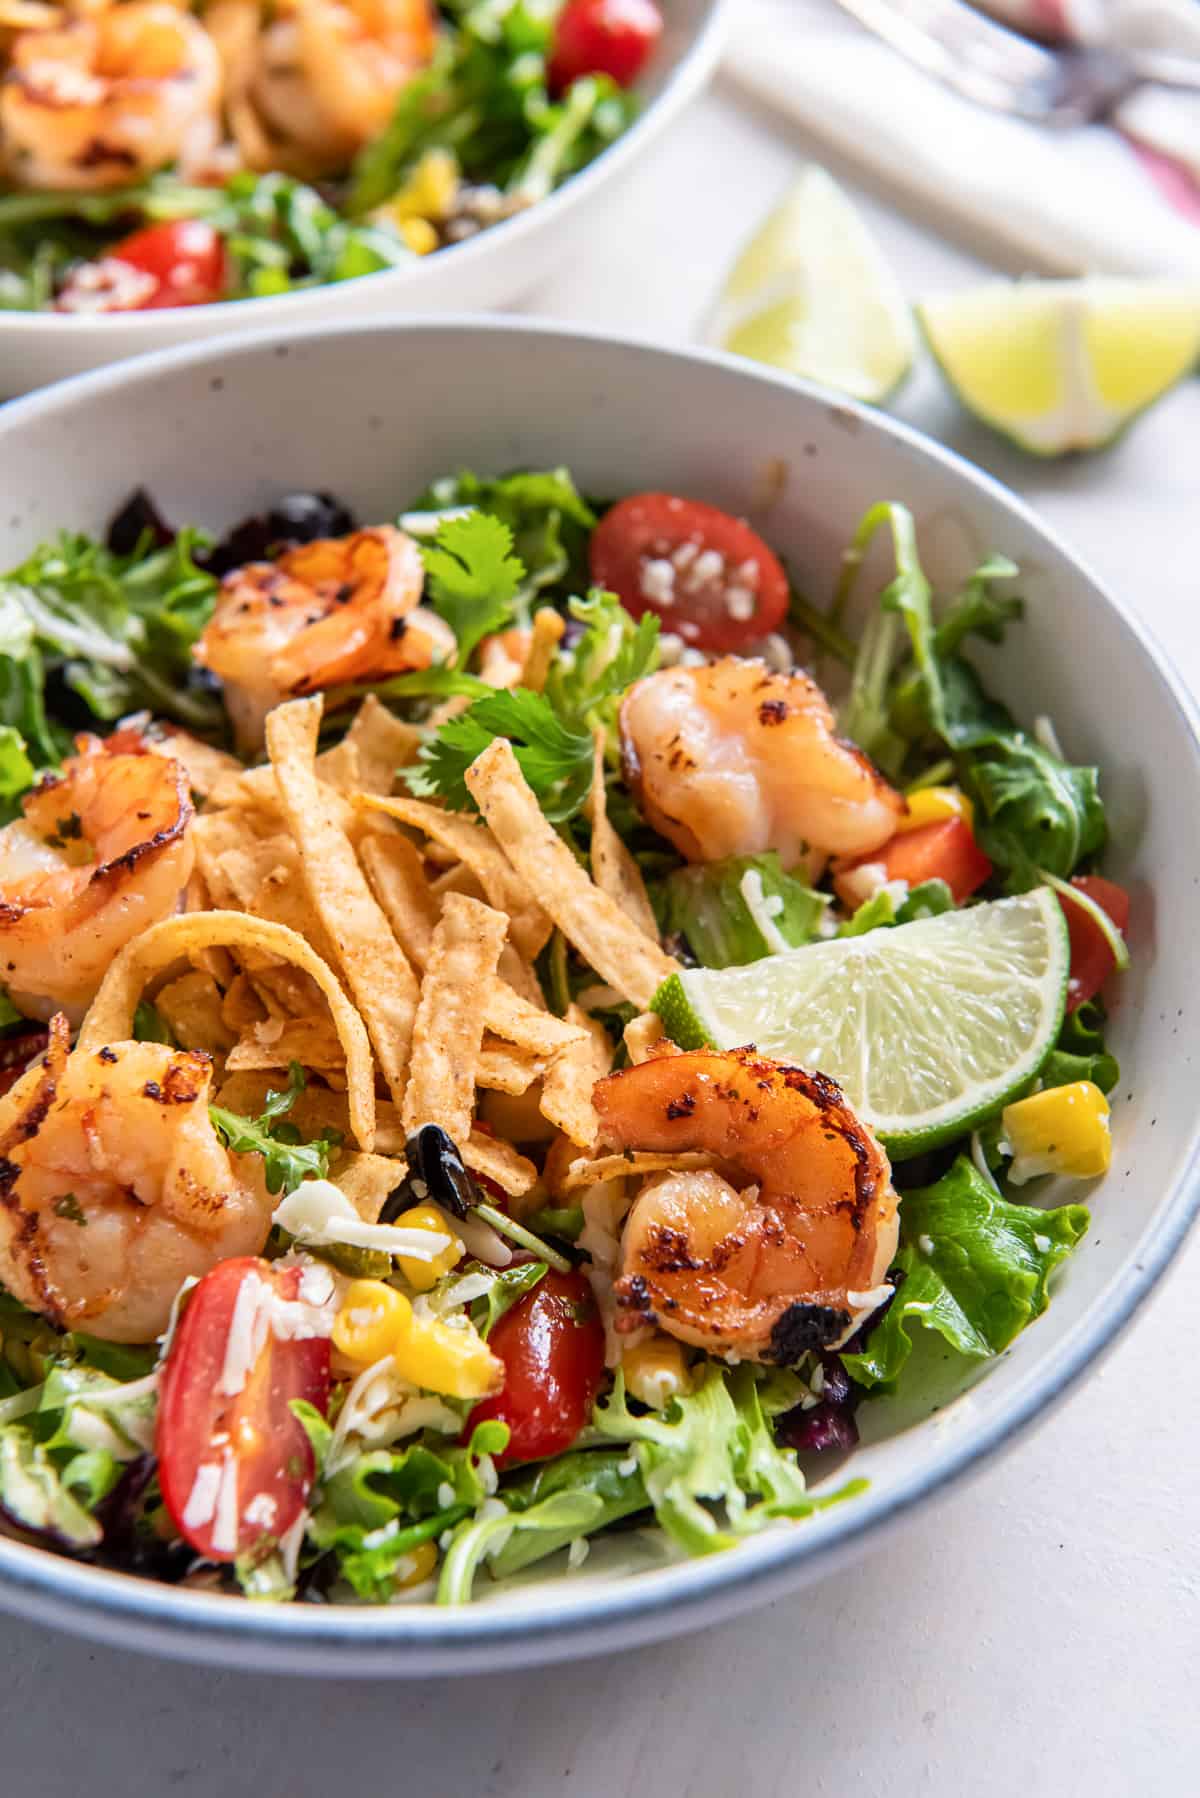 A close up of a salad with shrimp, bell peppers, cheese, and topped with tortilla strips.